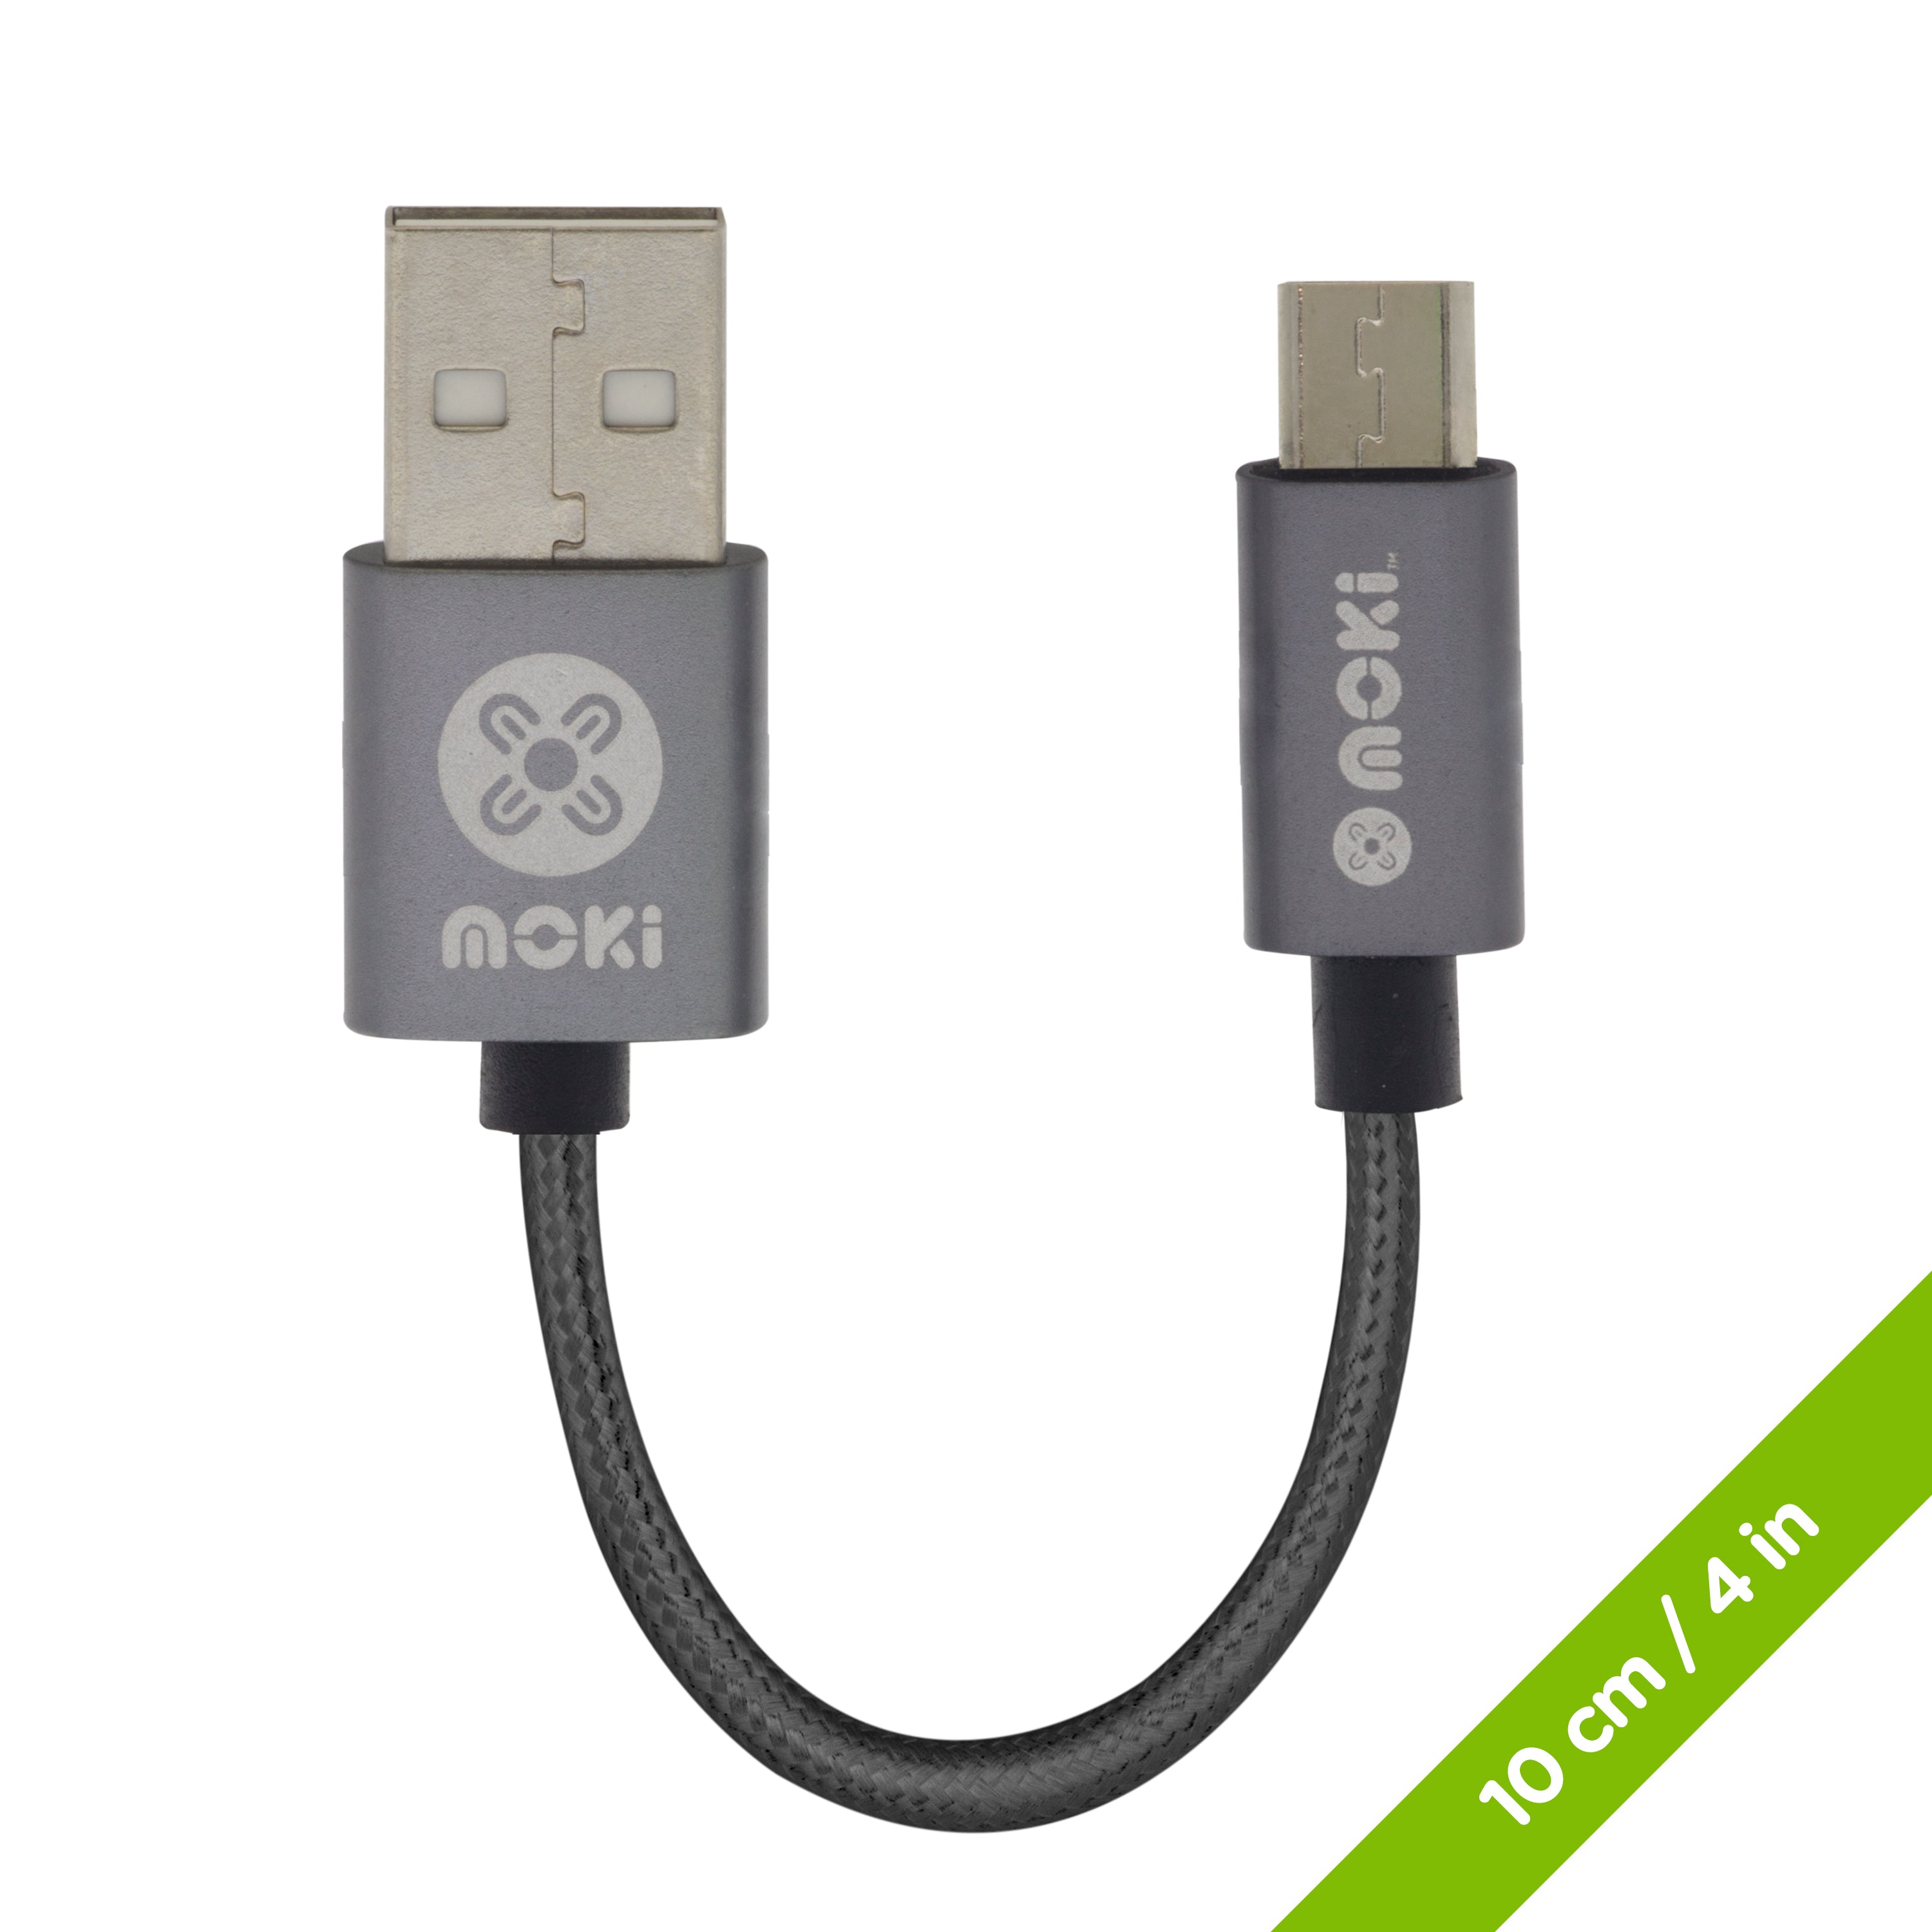 MicroUSB to USB SynCharge Braided Cable